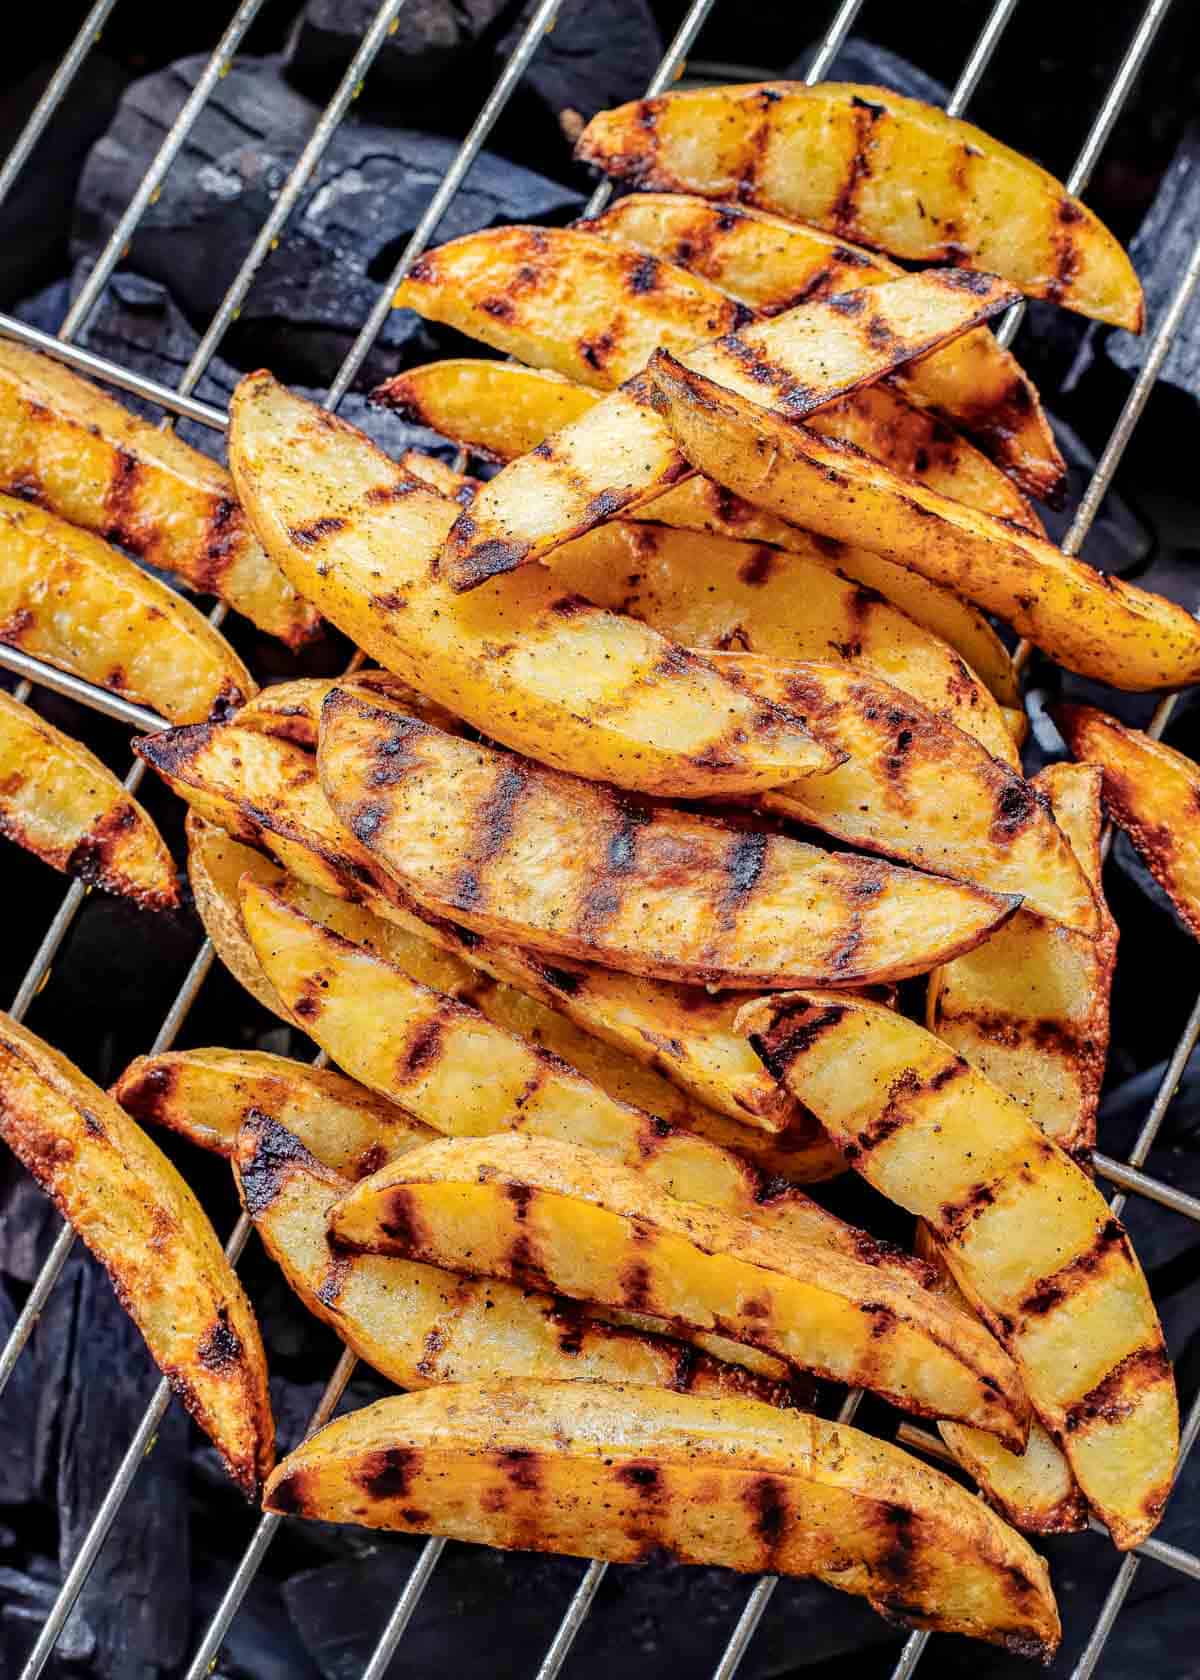 Grilled potato wedges on a grill.